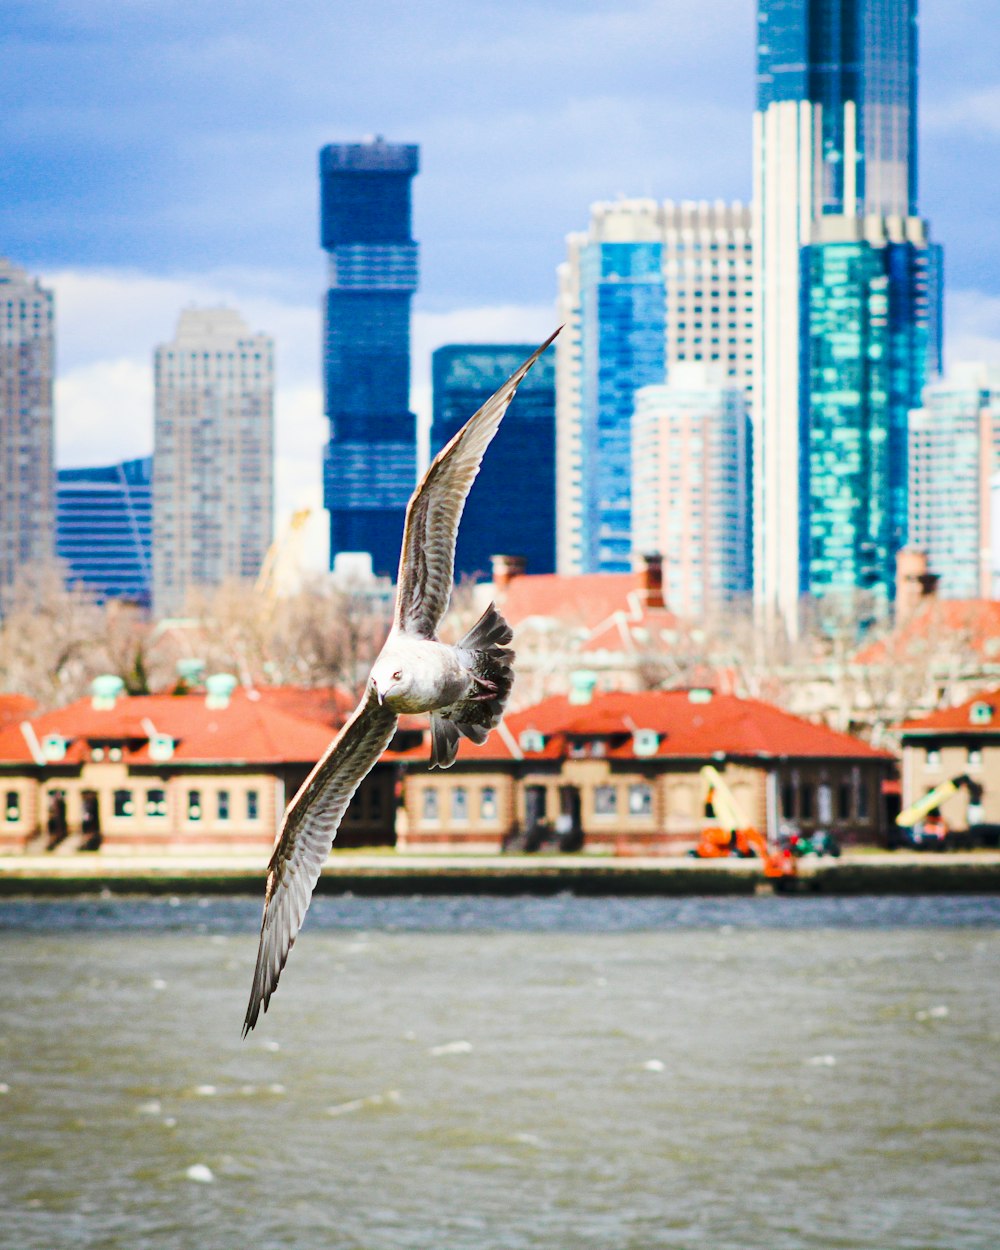 a seagull flying over a body of water with a city in the background